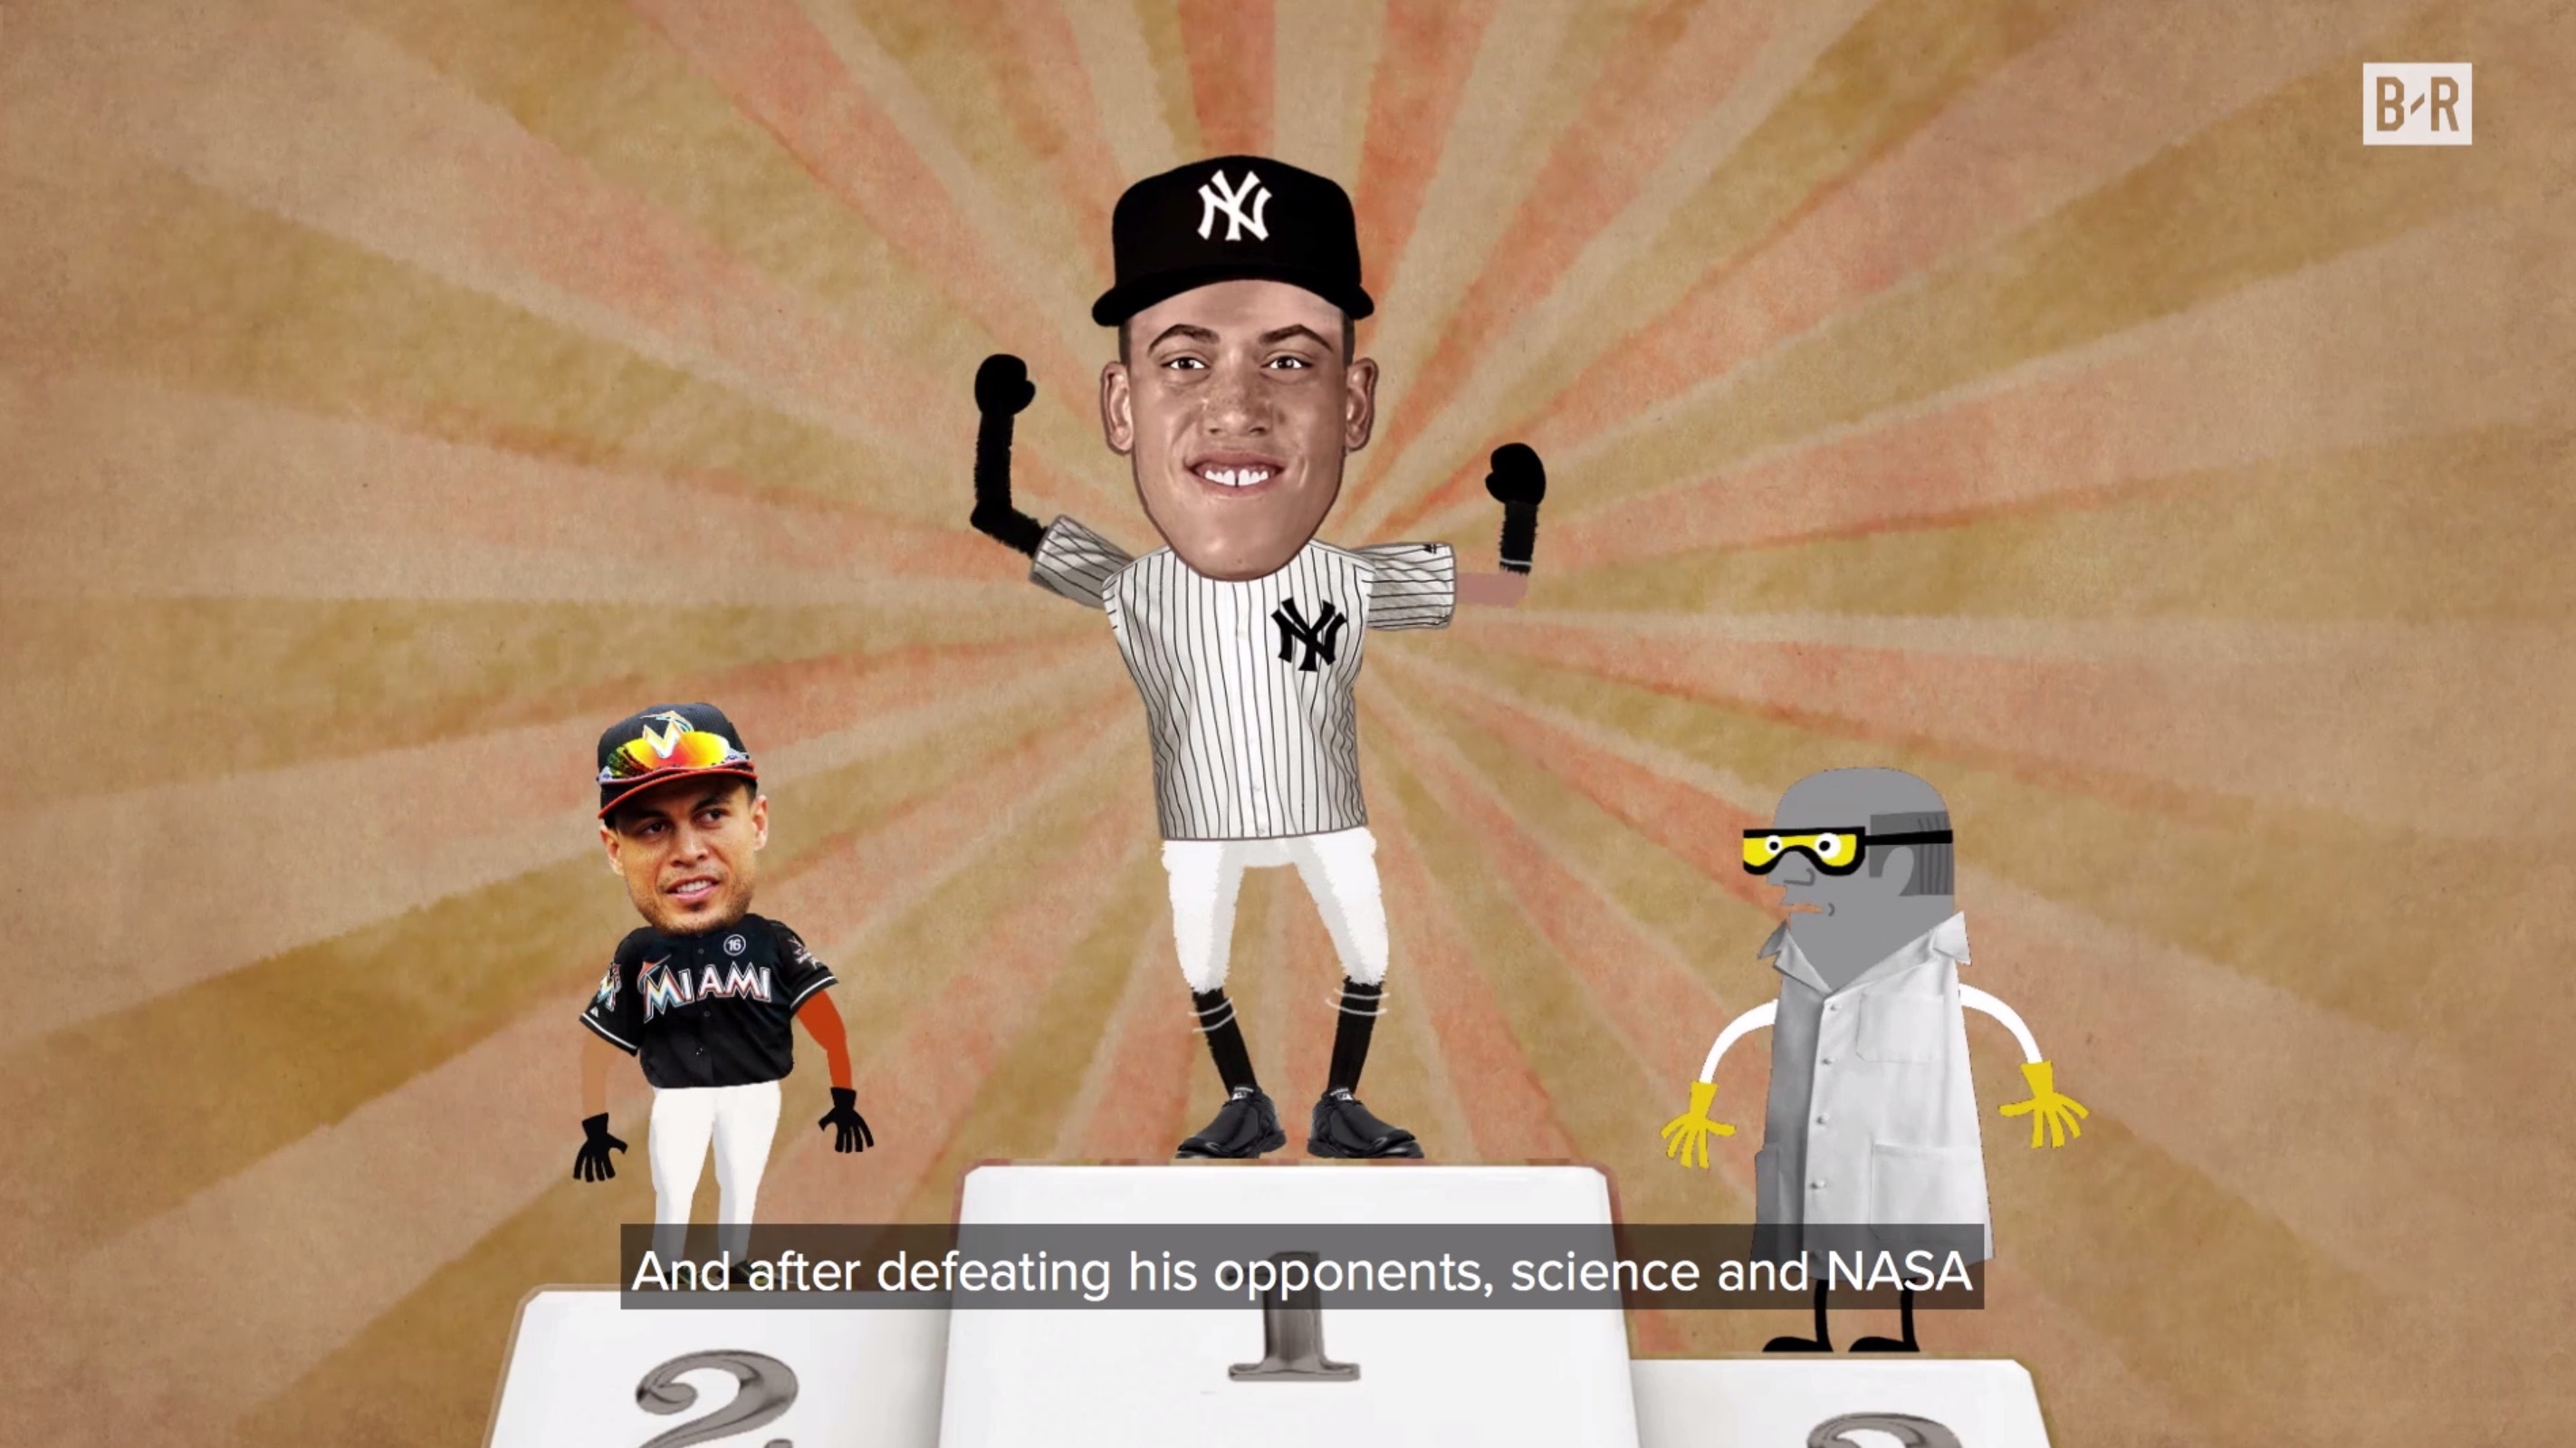 MLB Tall Tales: Aaron Judge Breaks Science with Monster Home Run